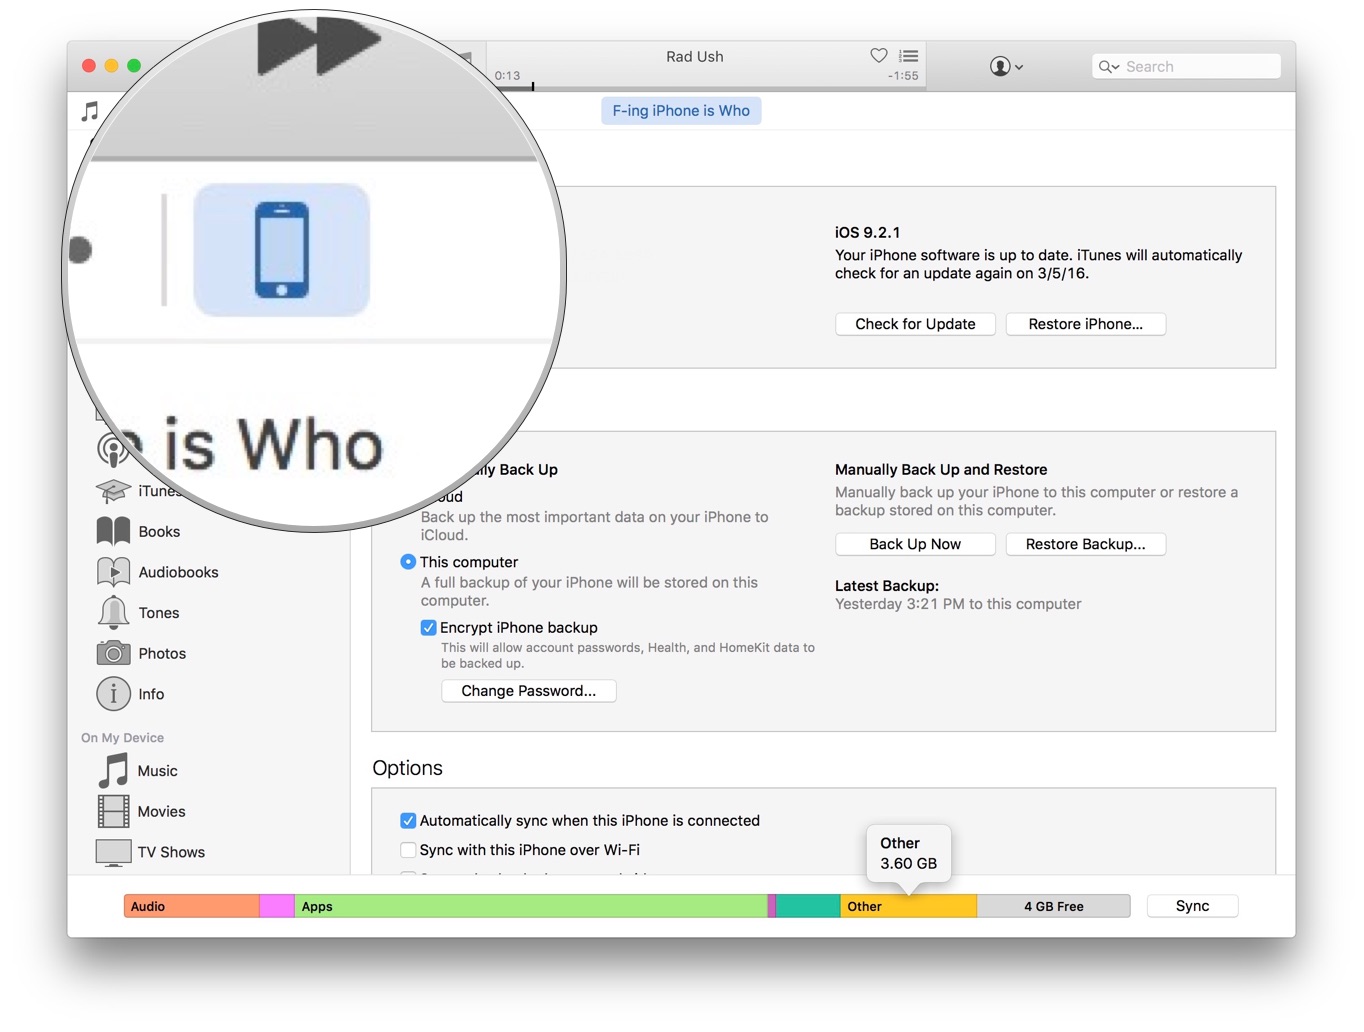 How to find and remove 'Other' files from iPhone and iPad